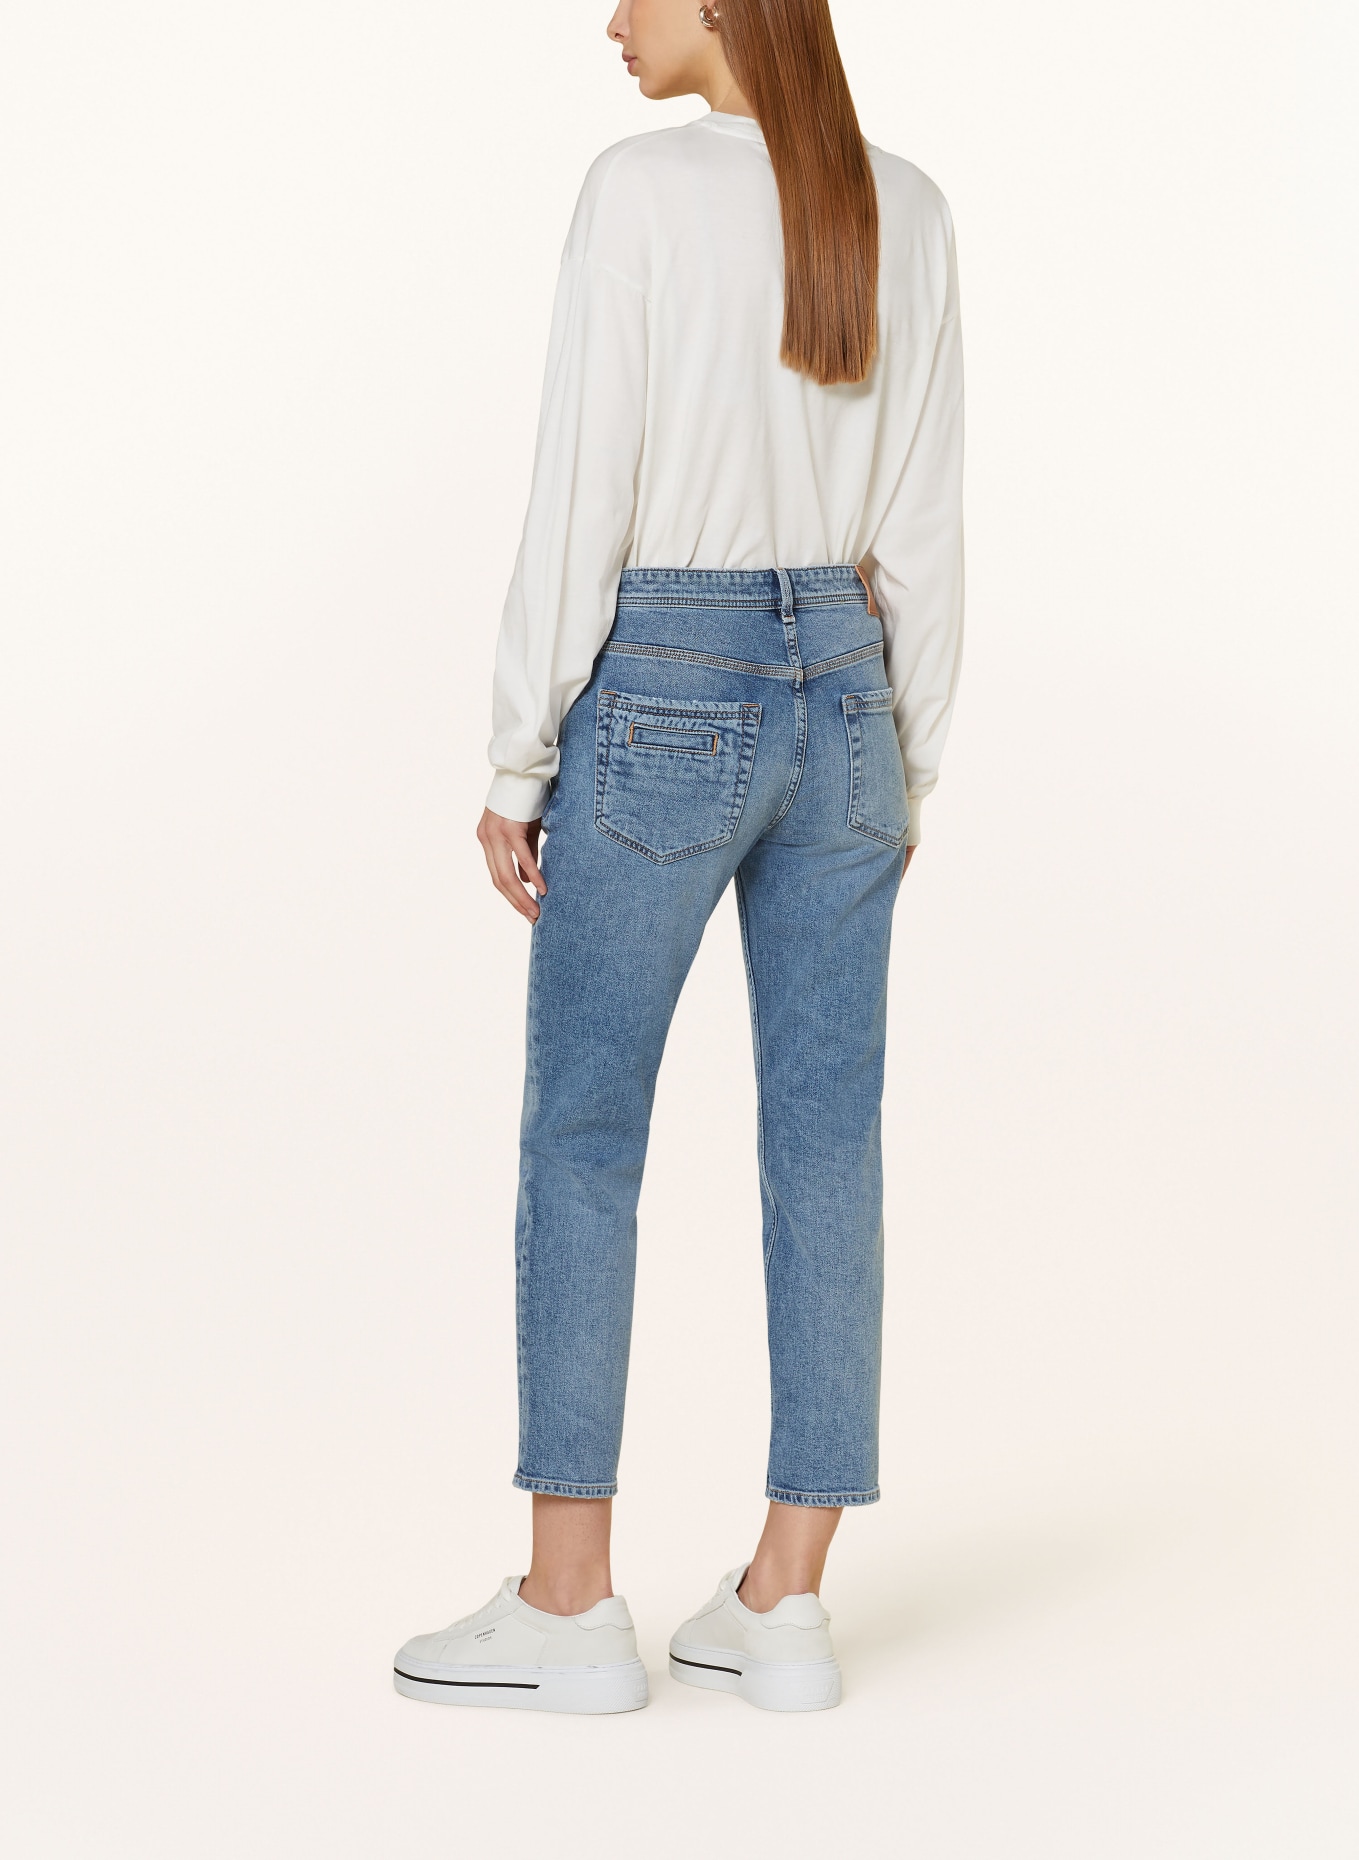 Marc O'Polo 7/8-Jeans THEDA, Farbe: 041 Sustainable clean blue wash (Bild 3)